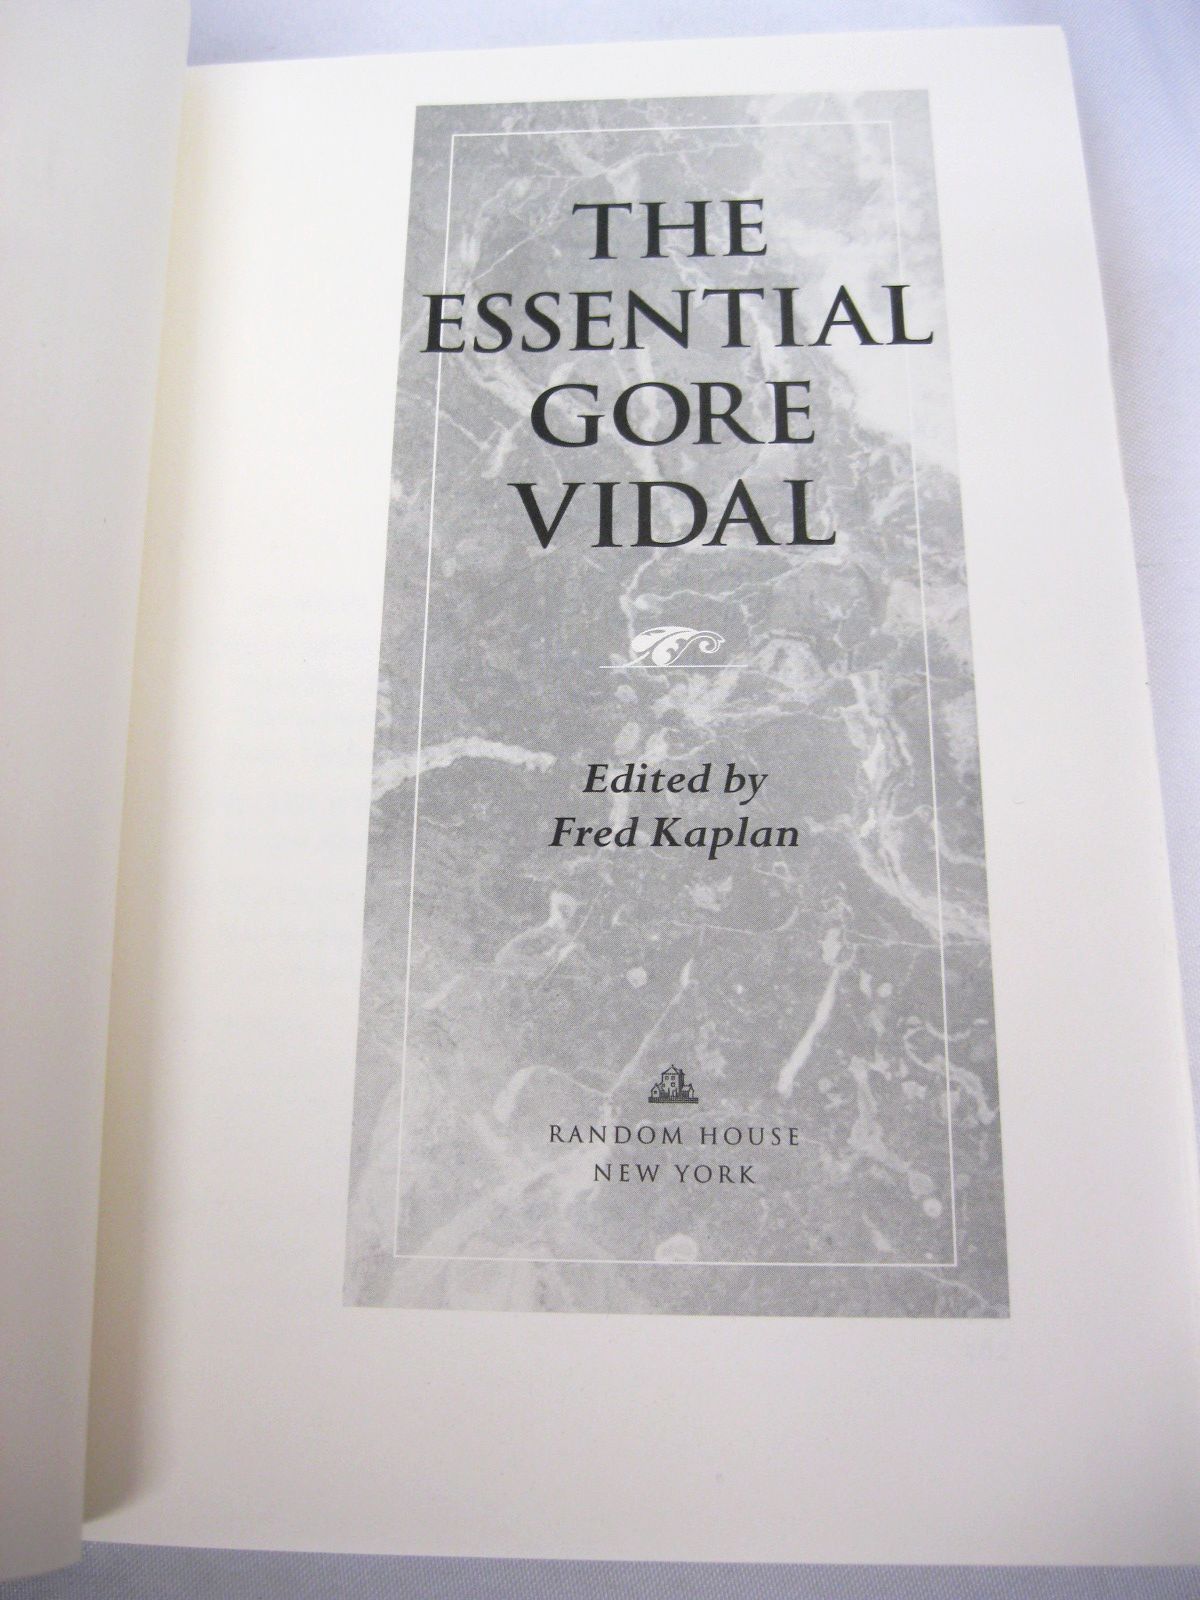 The Essential Gore Vidal edited by Fred Kaplan